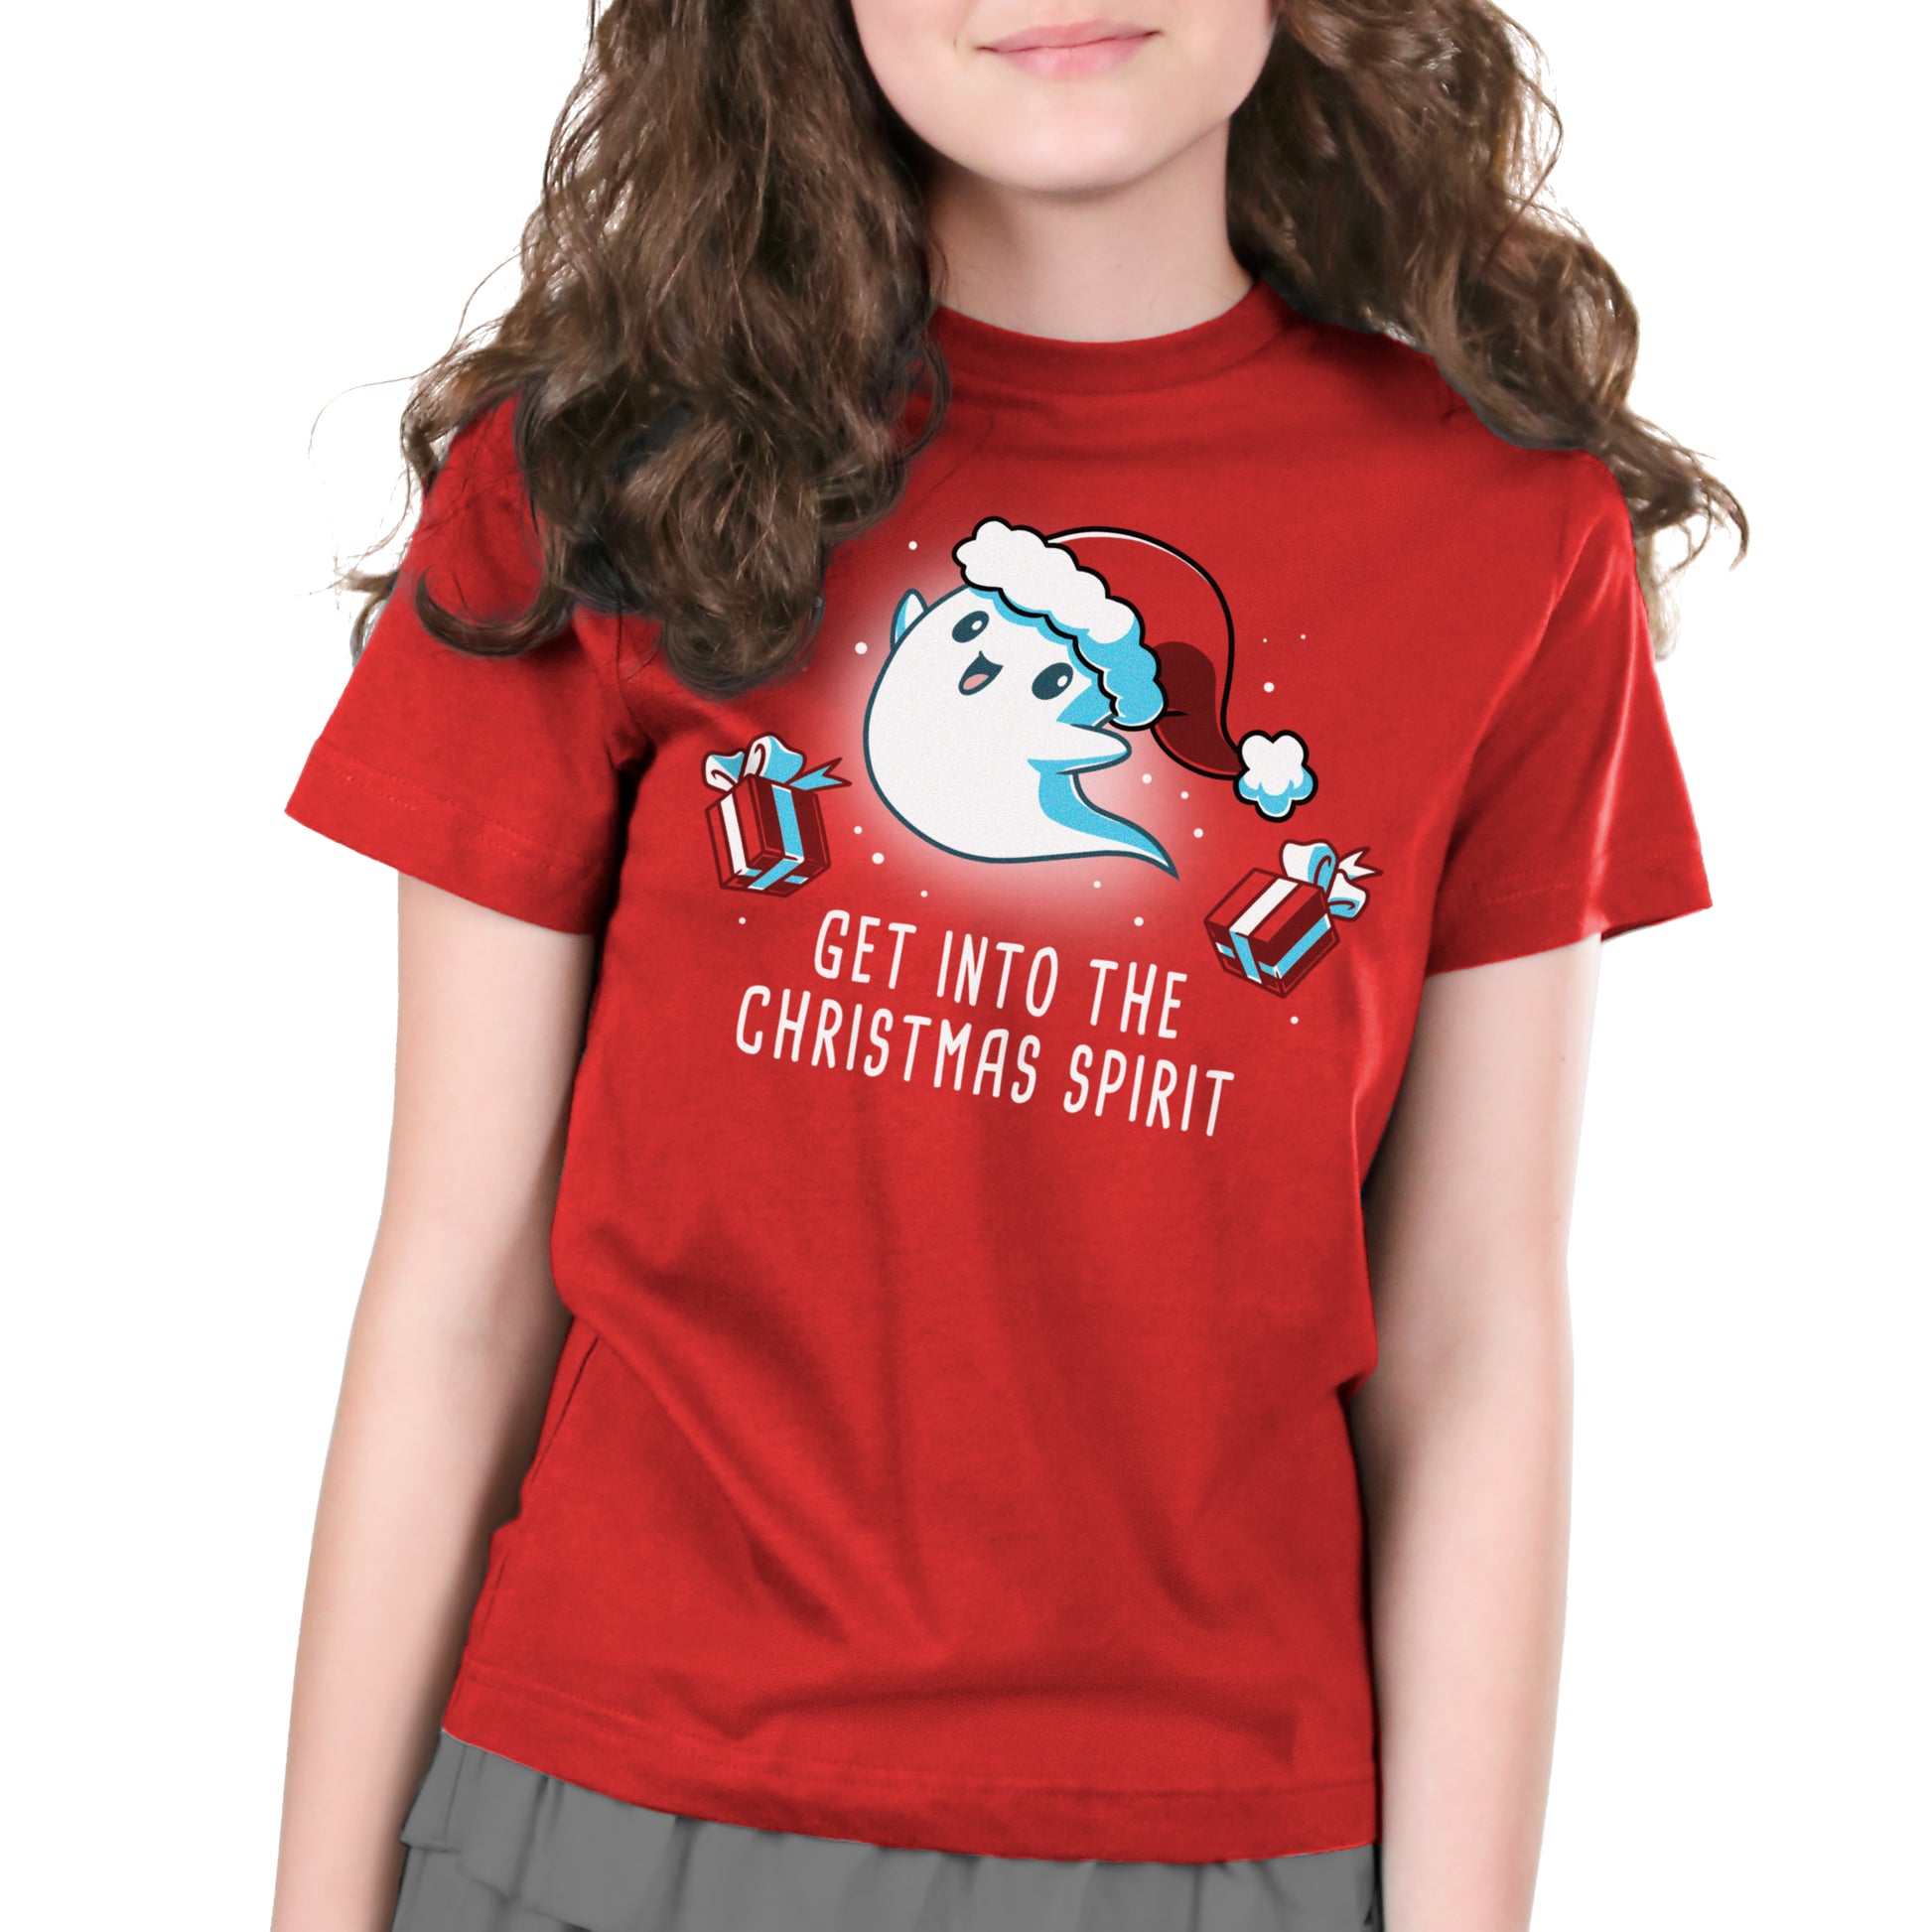 A girl wearing the "Get into the Christmas Spirit" t-shirt by TeeTurtle is spreading the holiday spirit.